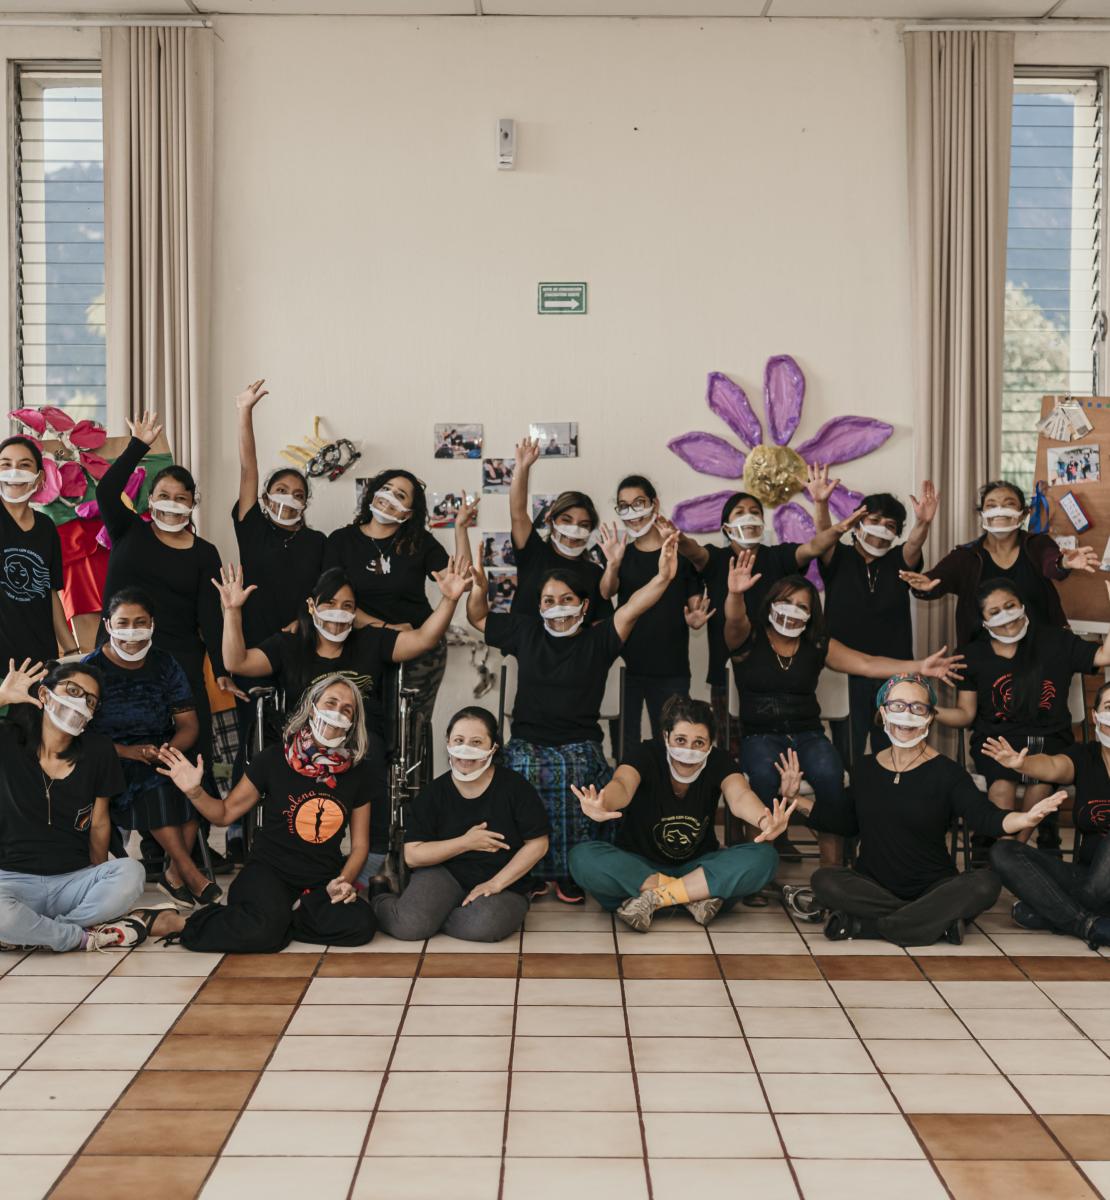 Members of the organization "Mujeres con Capacidad de Soñar a Colores" pose together against a wall as they cheerfully spread their arms towards the front.